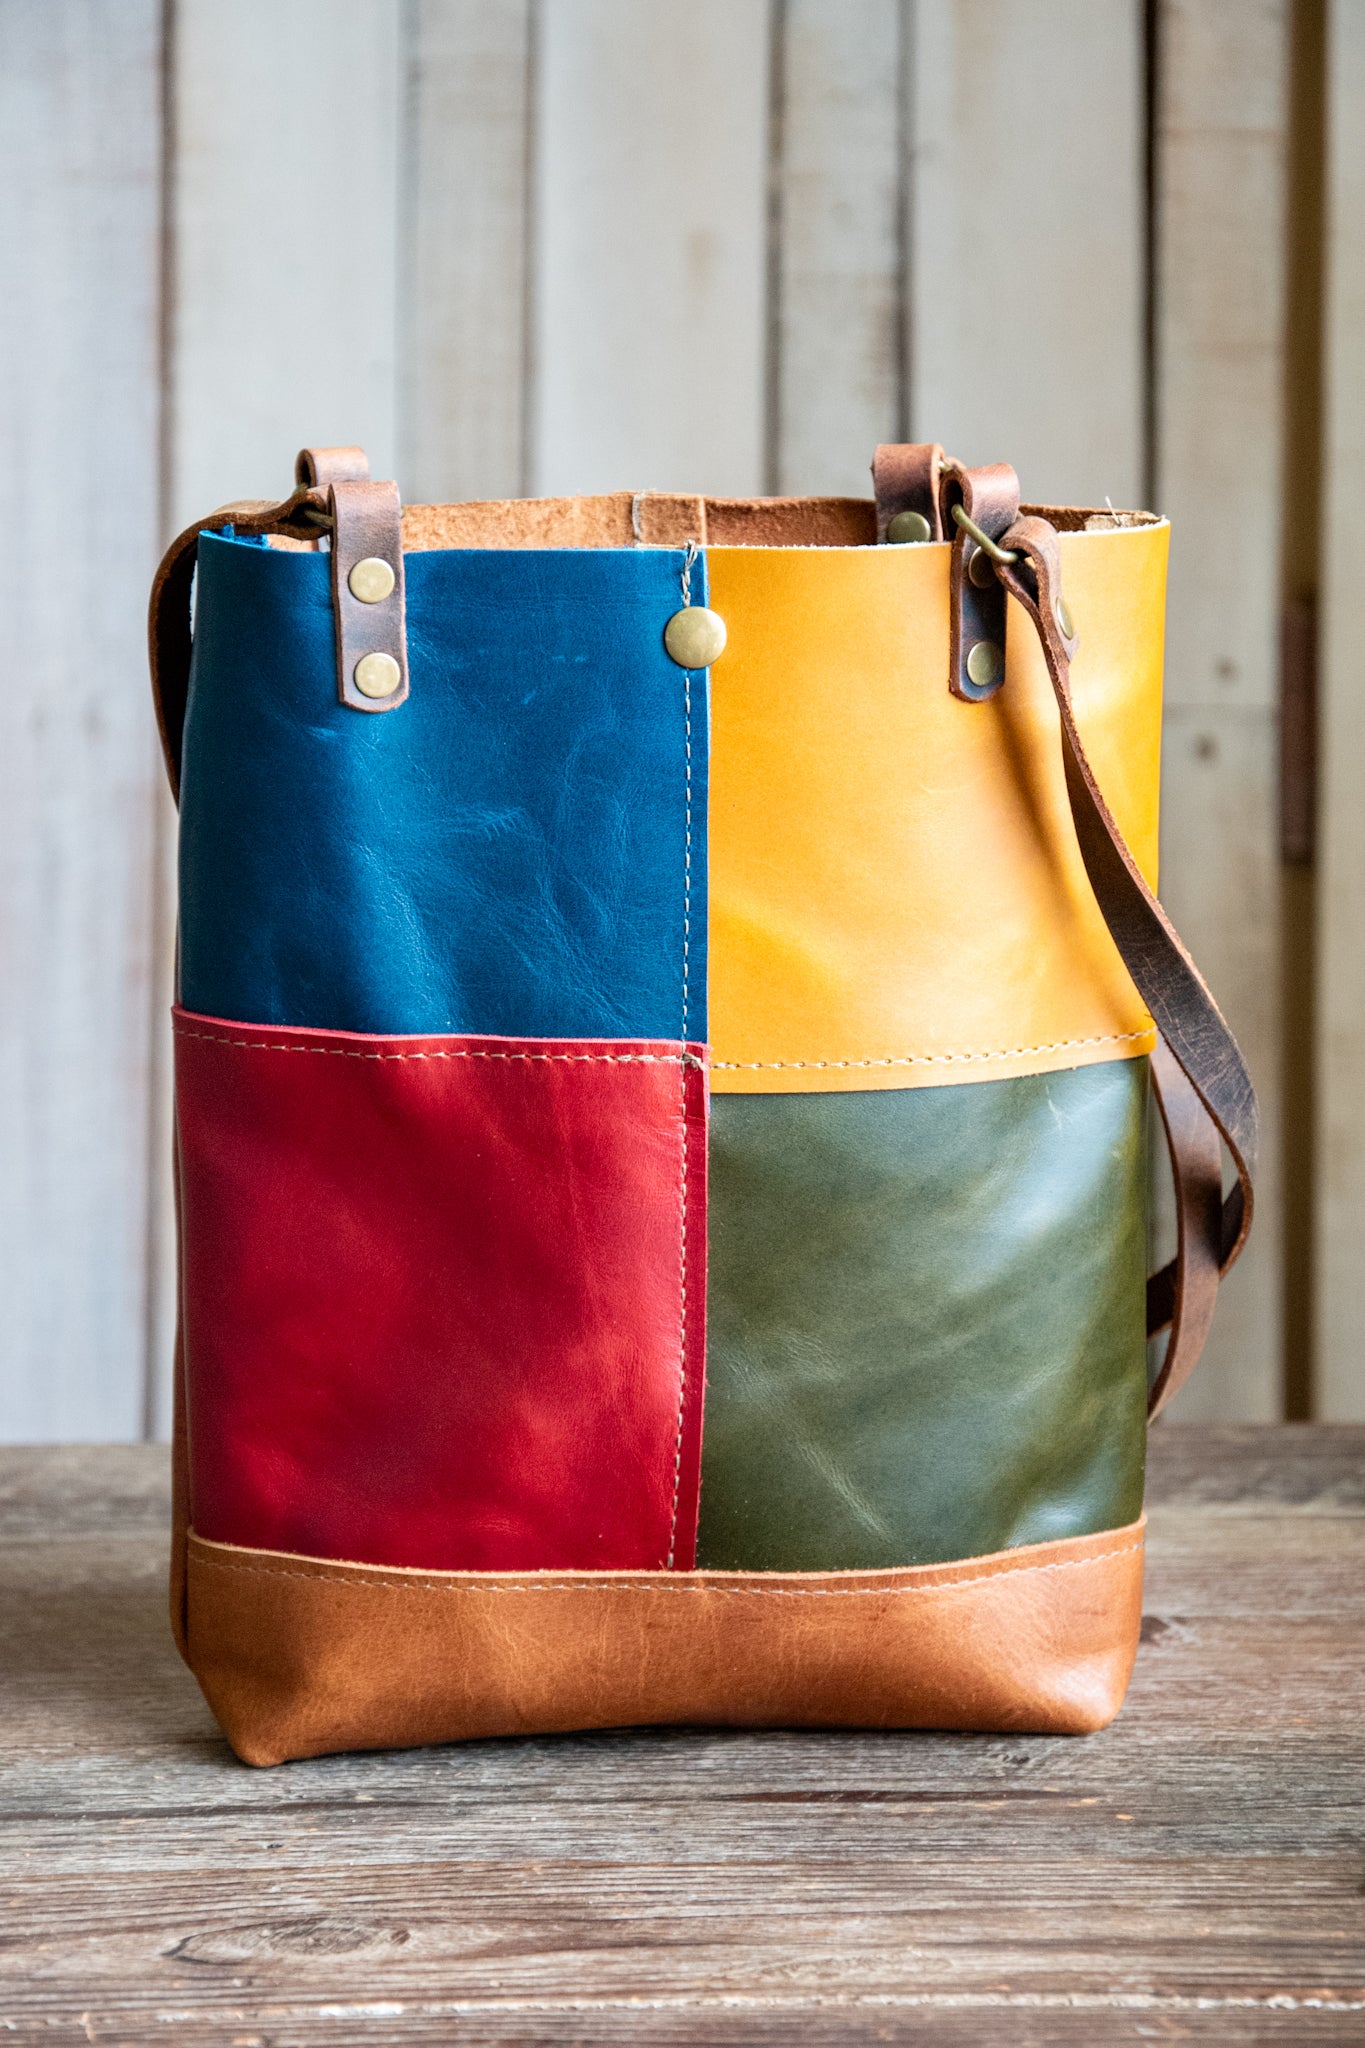 The Patchwork Small North South Tote| Limited Edition Purse | The Quad Tote